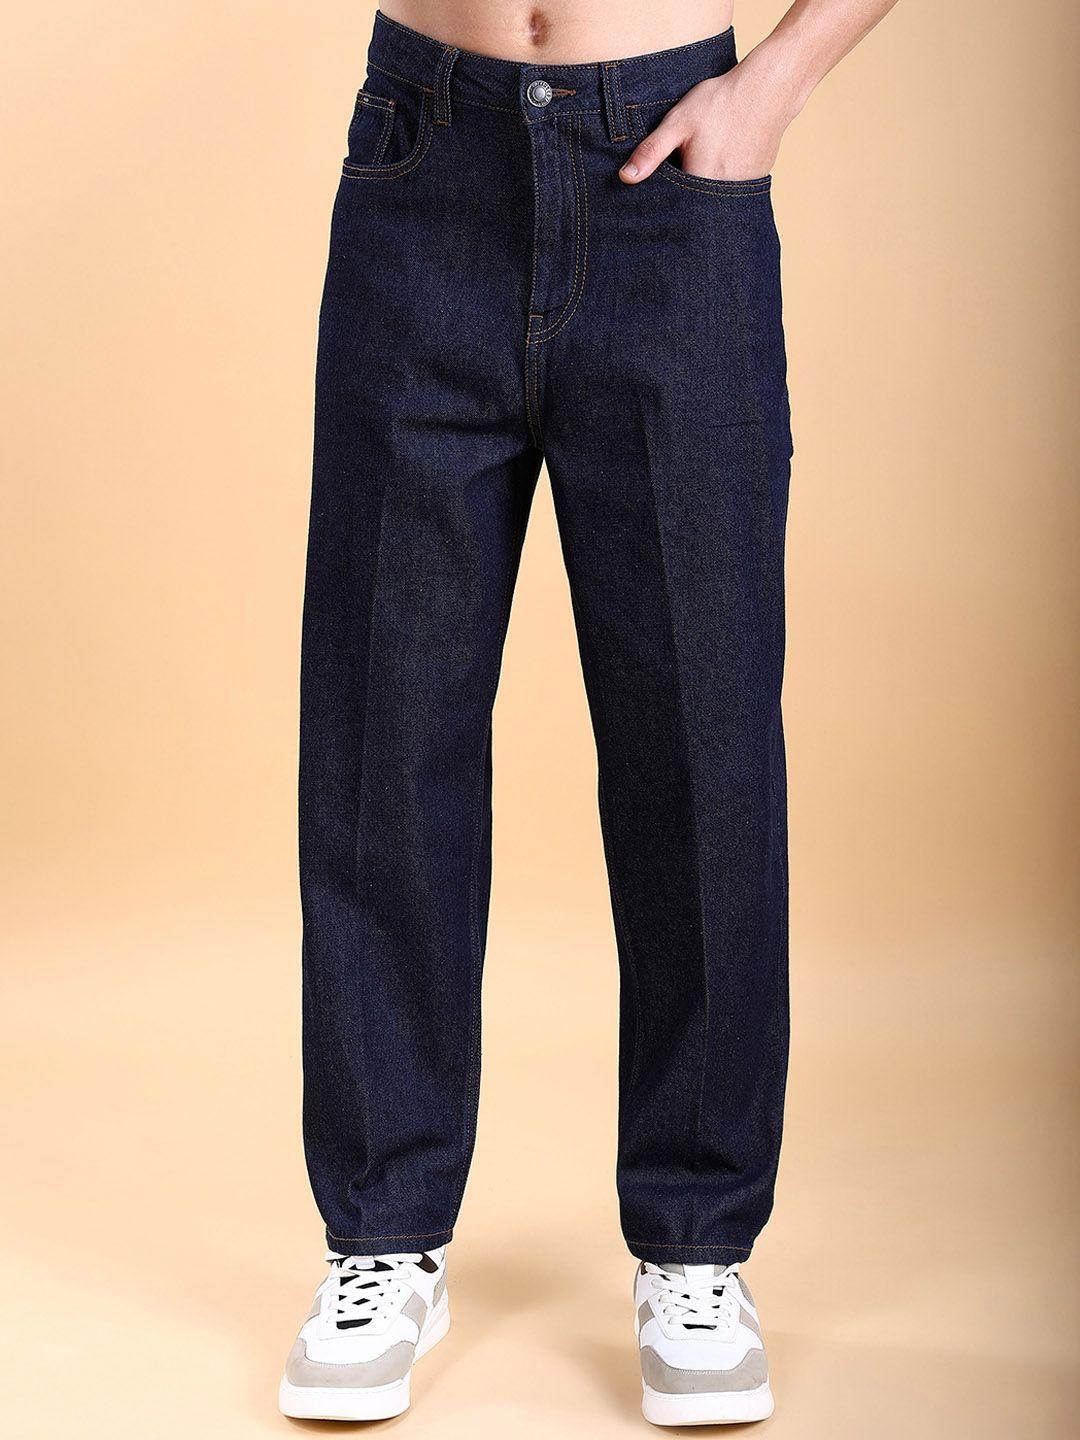 highlander men relaxed fit mid-rise jeans